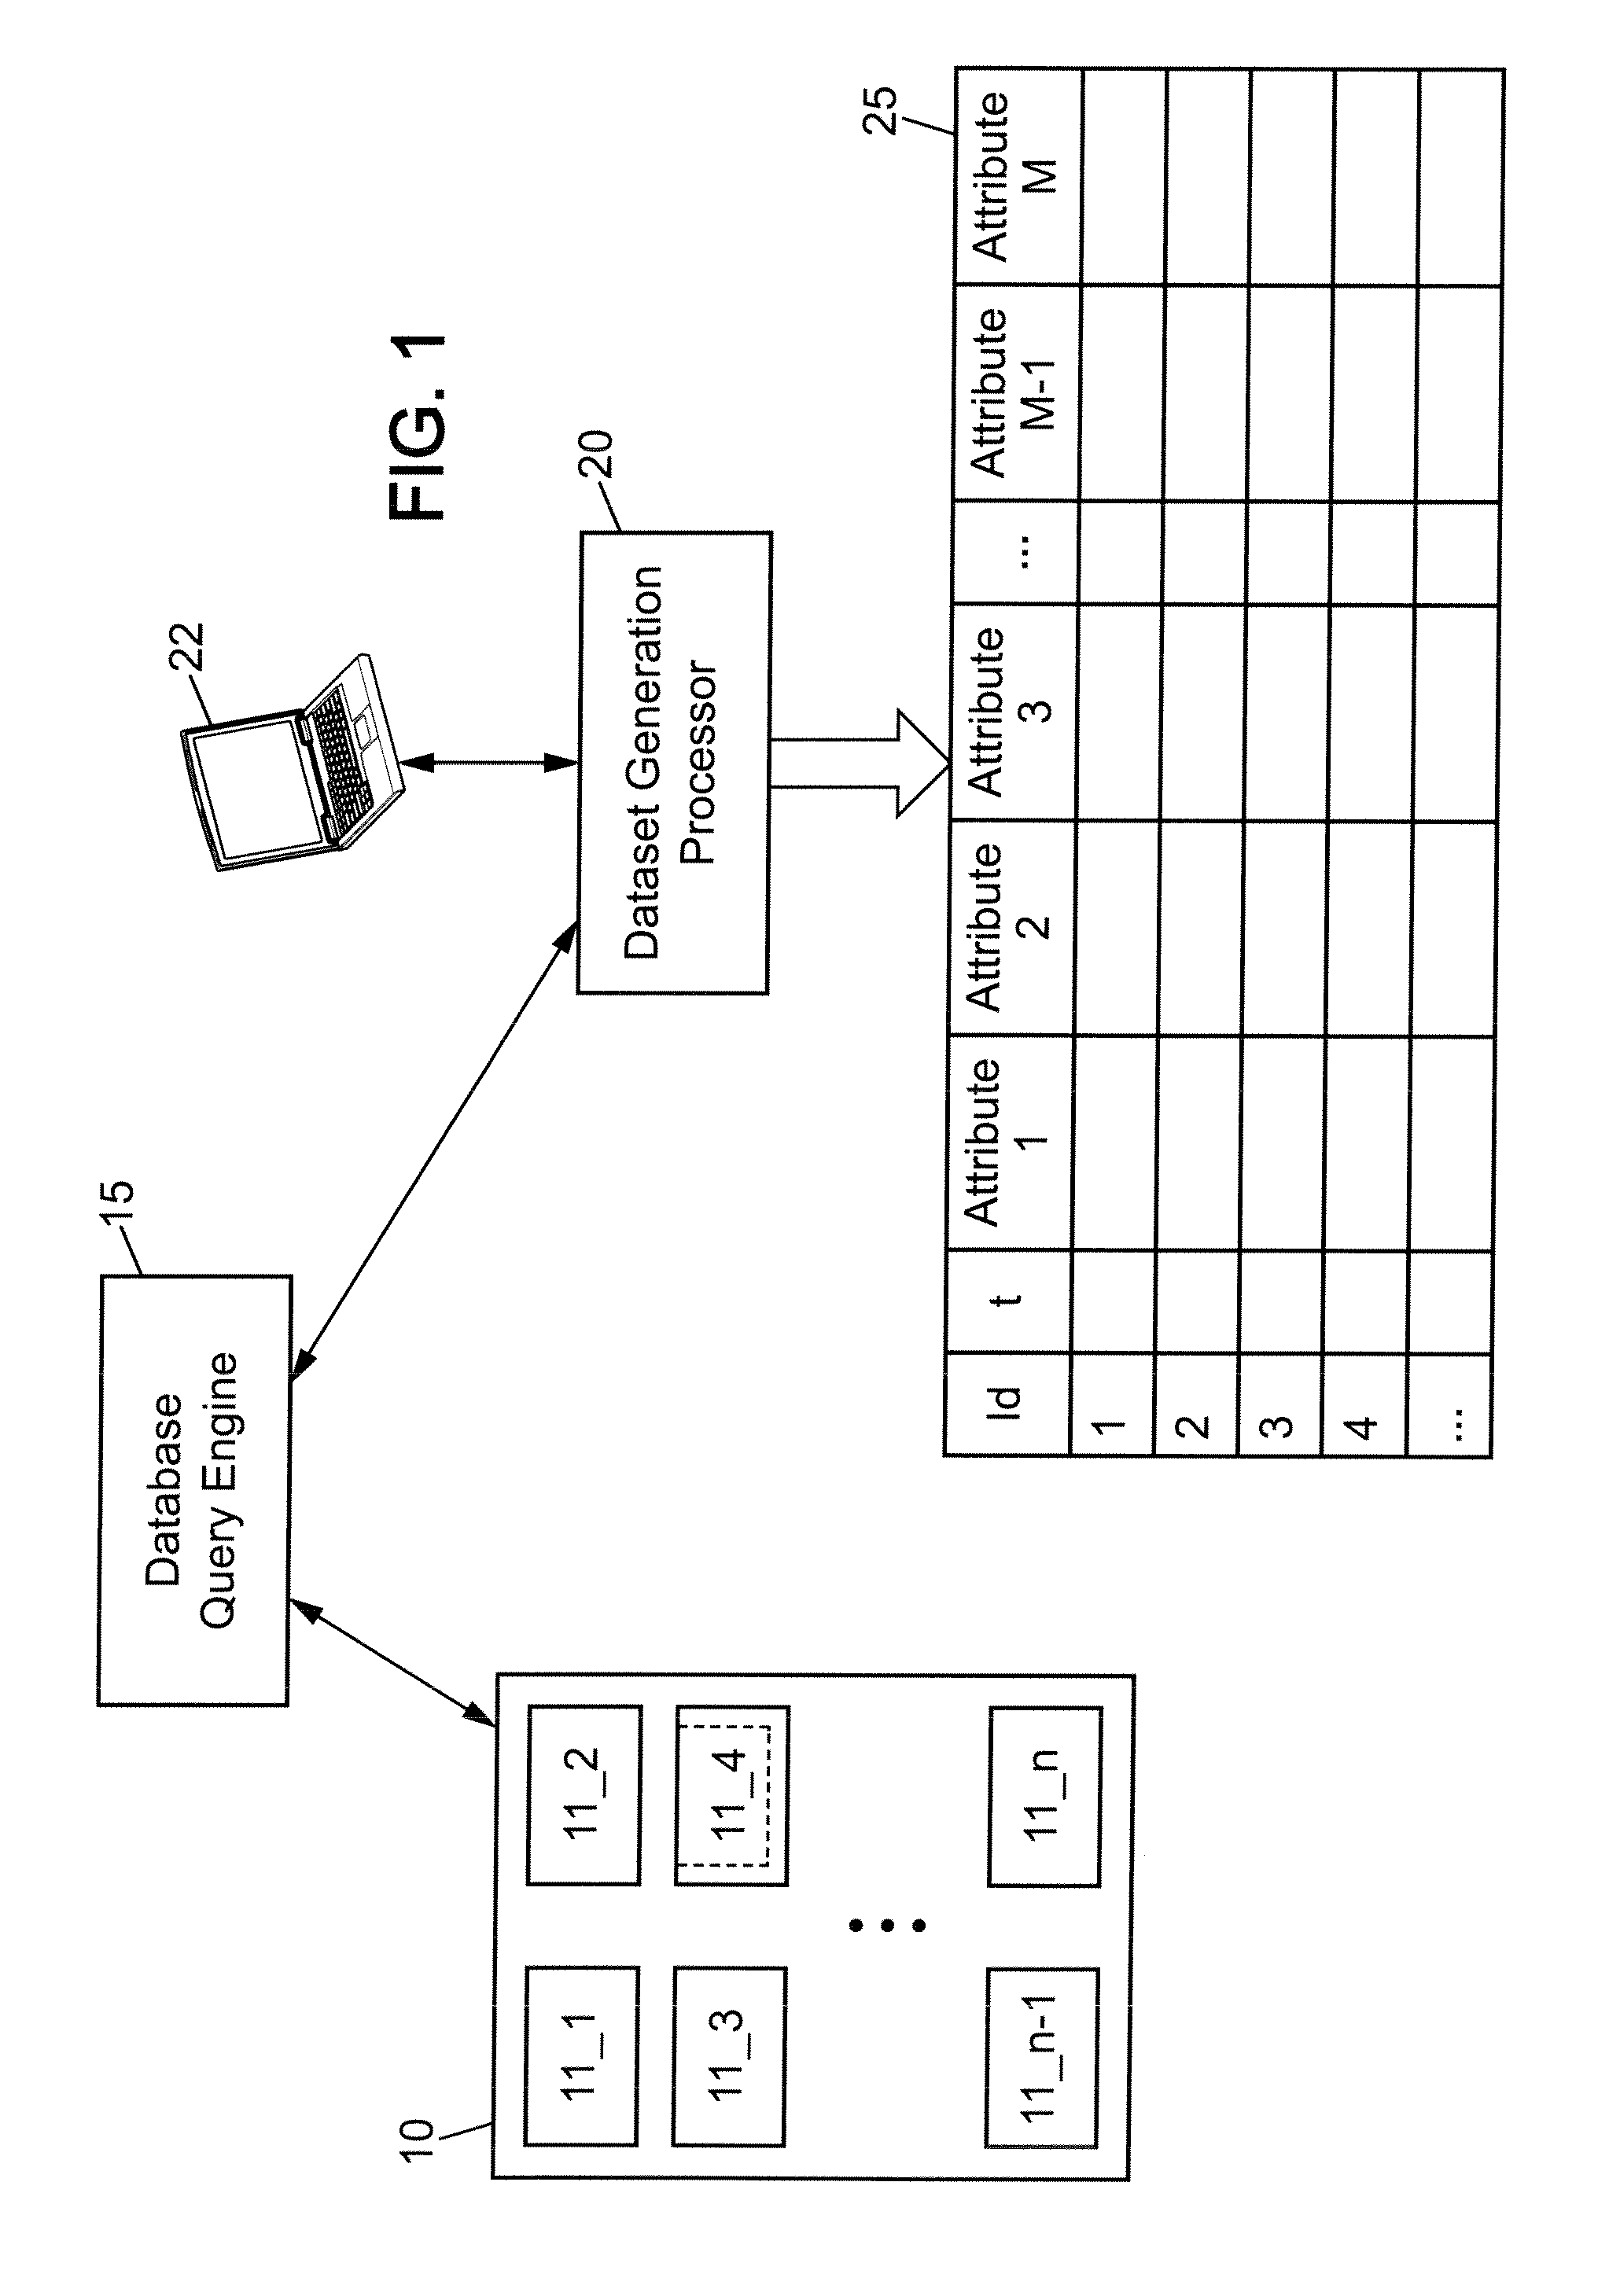 Method Of Generating An Analytical Data Set For Input Into An Analytical Model